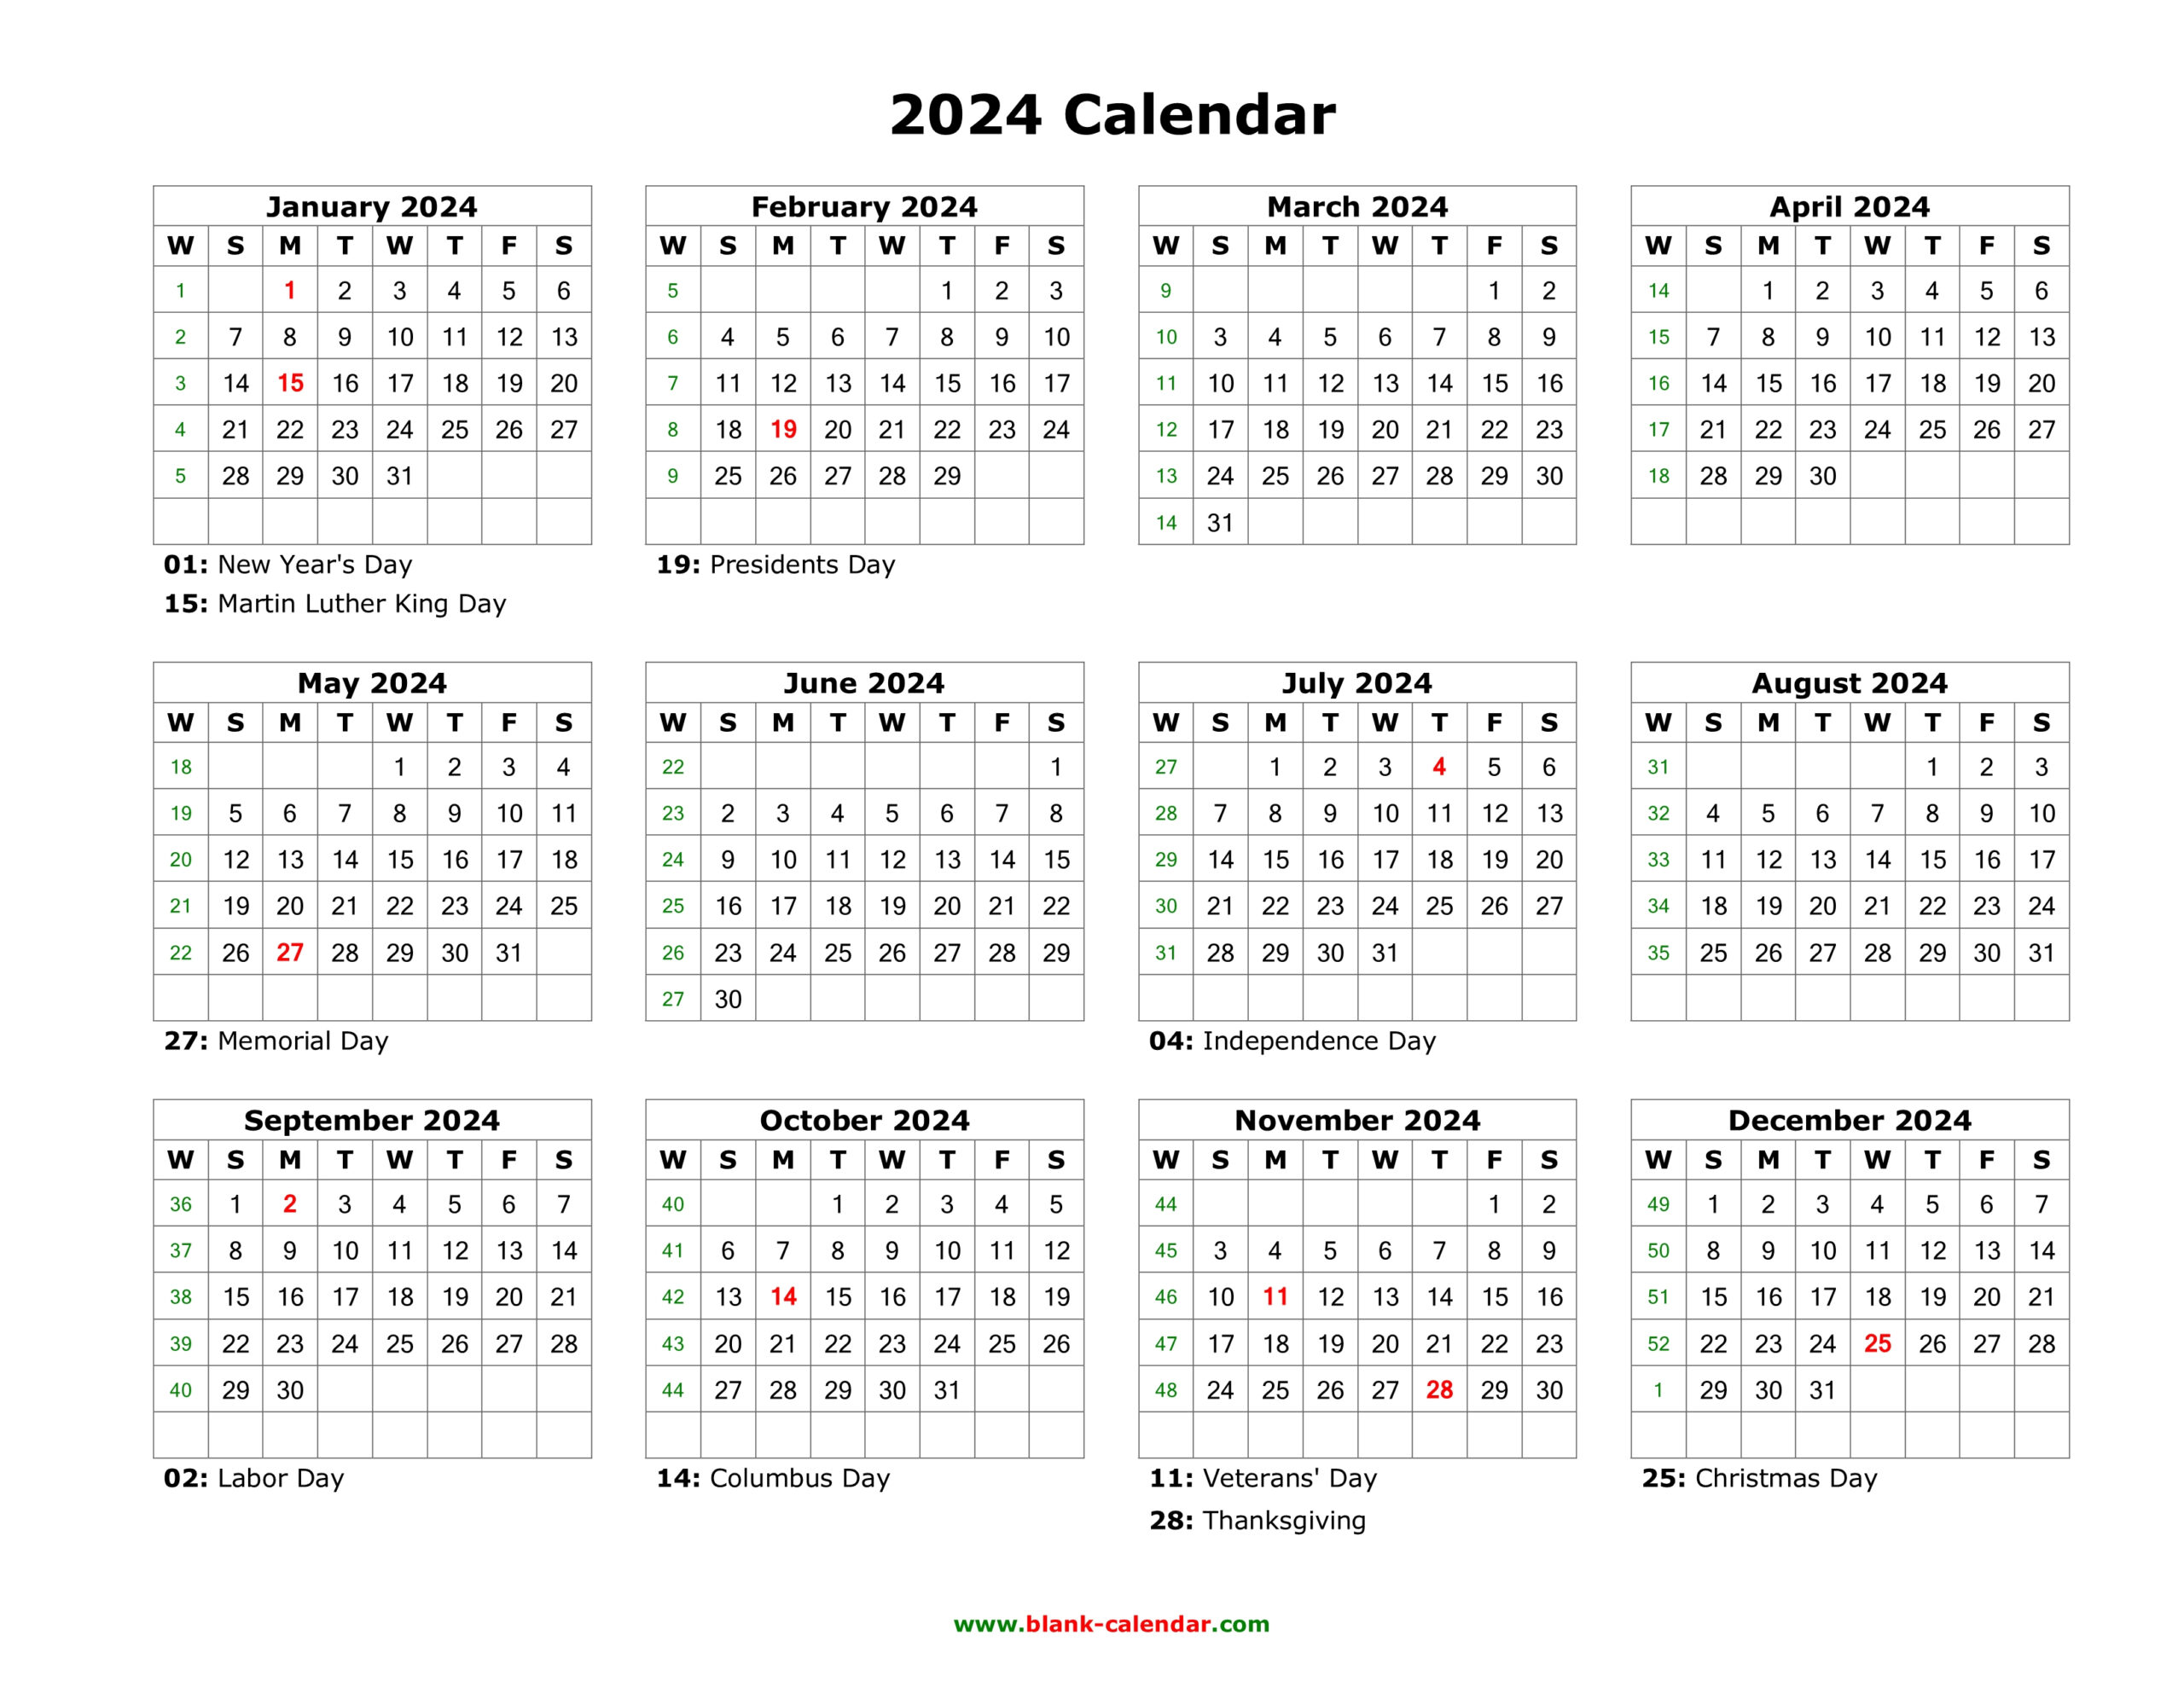 Blank Calendar 2024 | Free Download Calendar Templates for Printable 2024 Calendar With Holidays And Observances